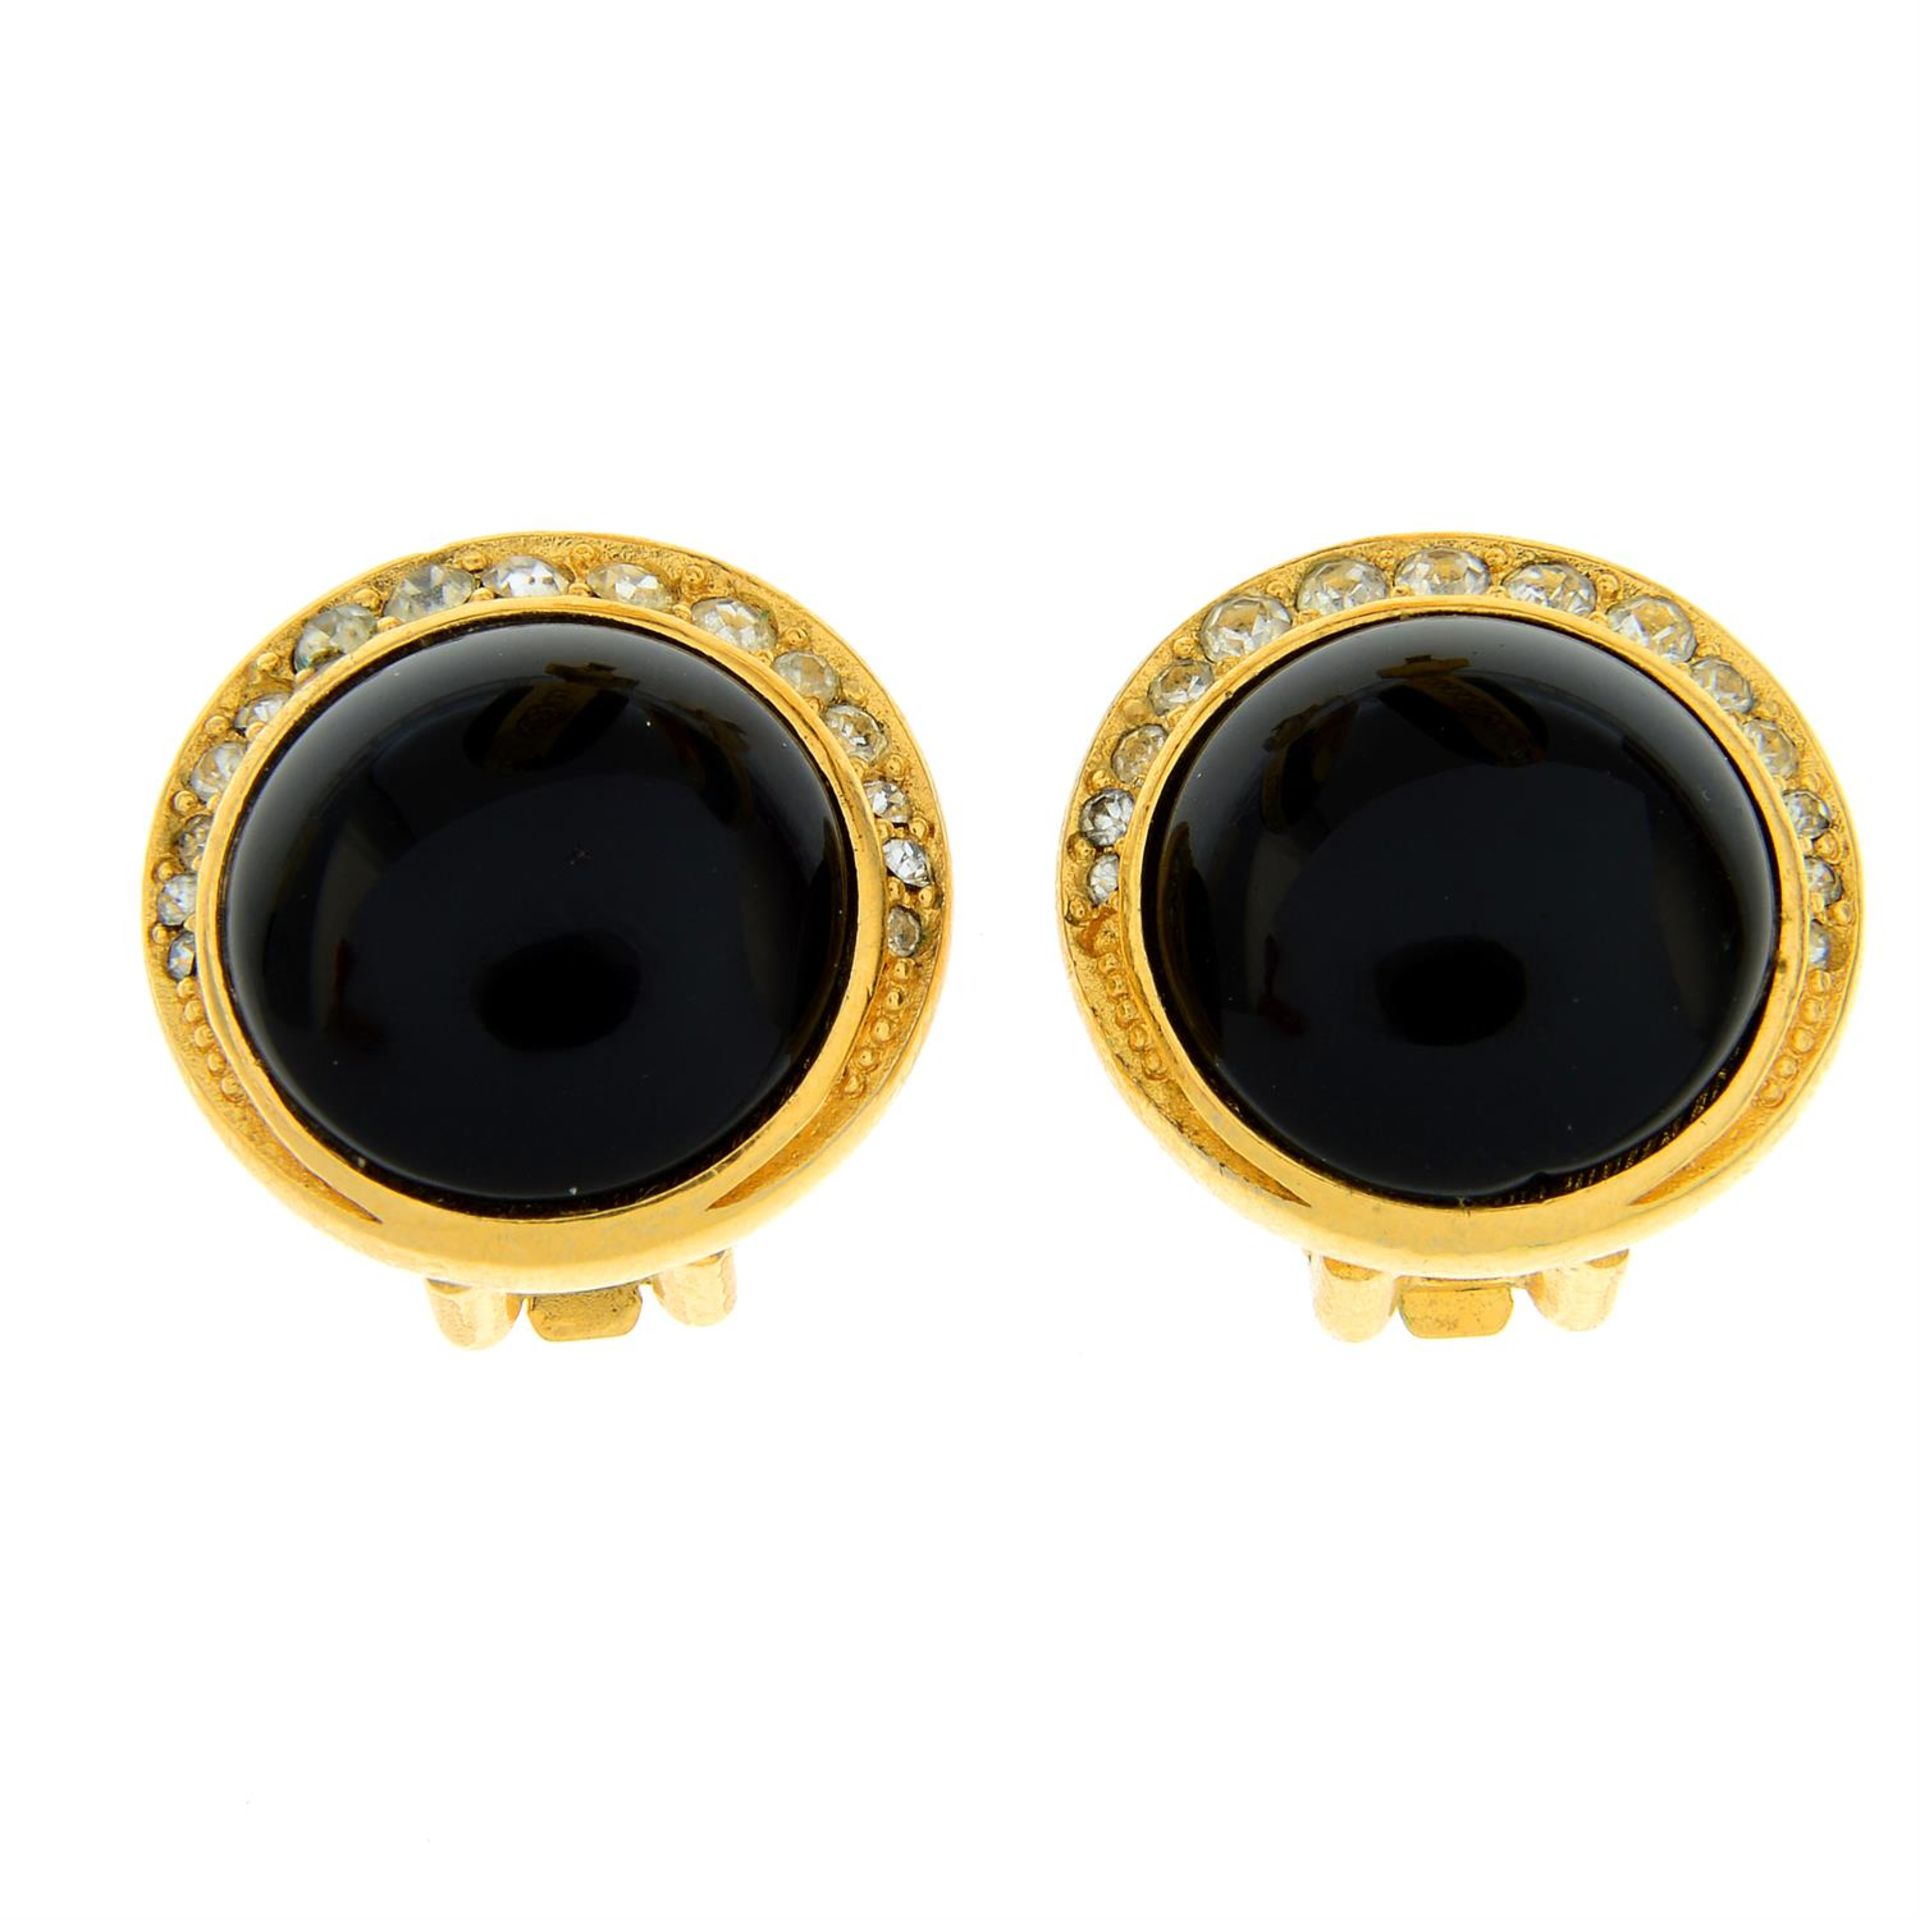 CHRISTIAN DIOR - two pairs of clear paste and black enamel clip-on earrings. - Image 2 of 3